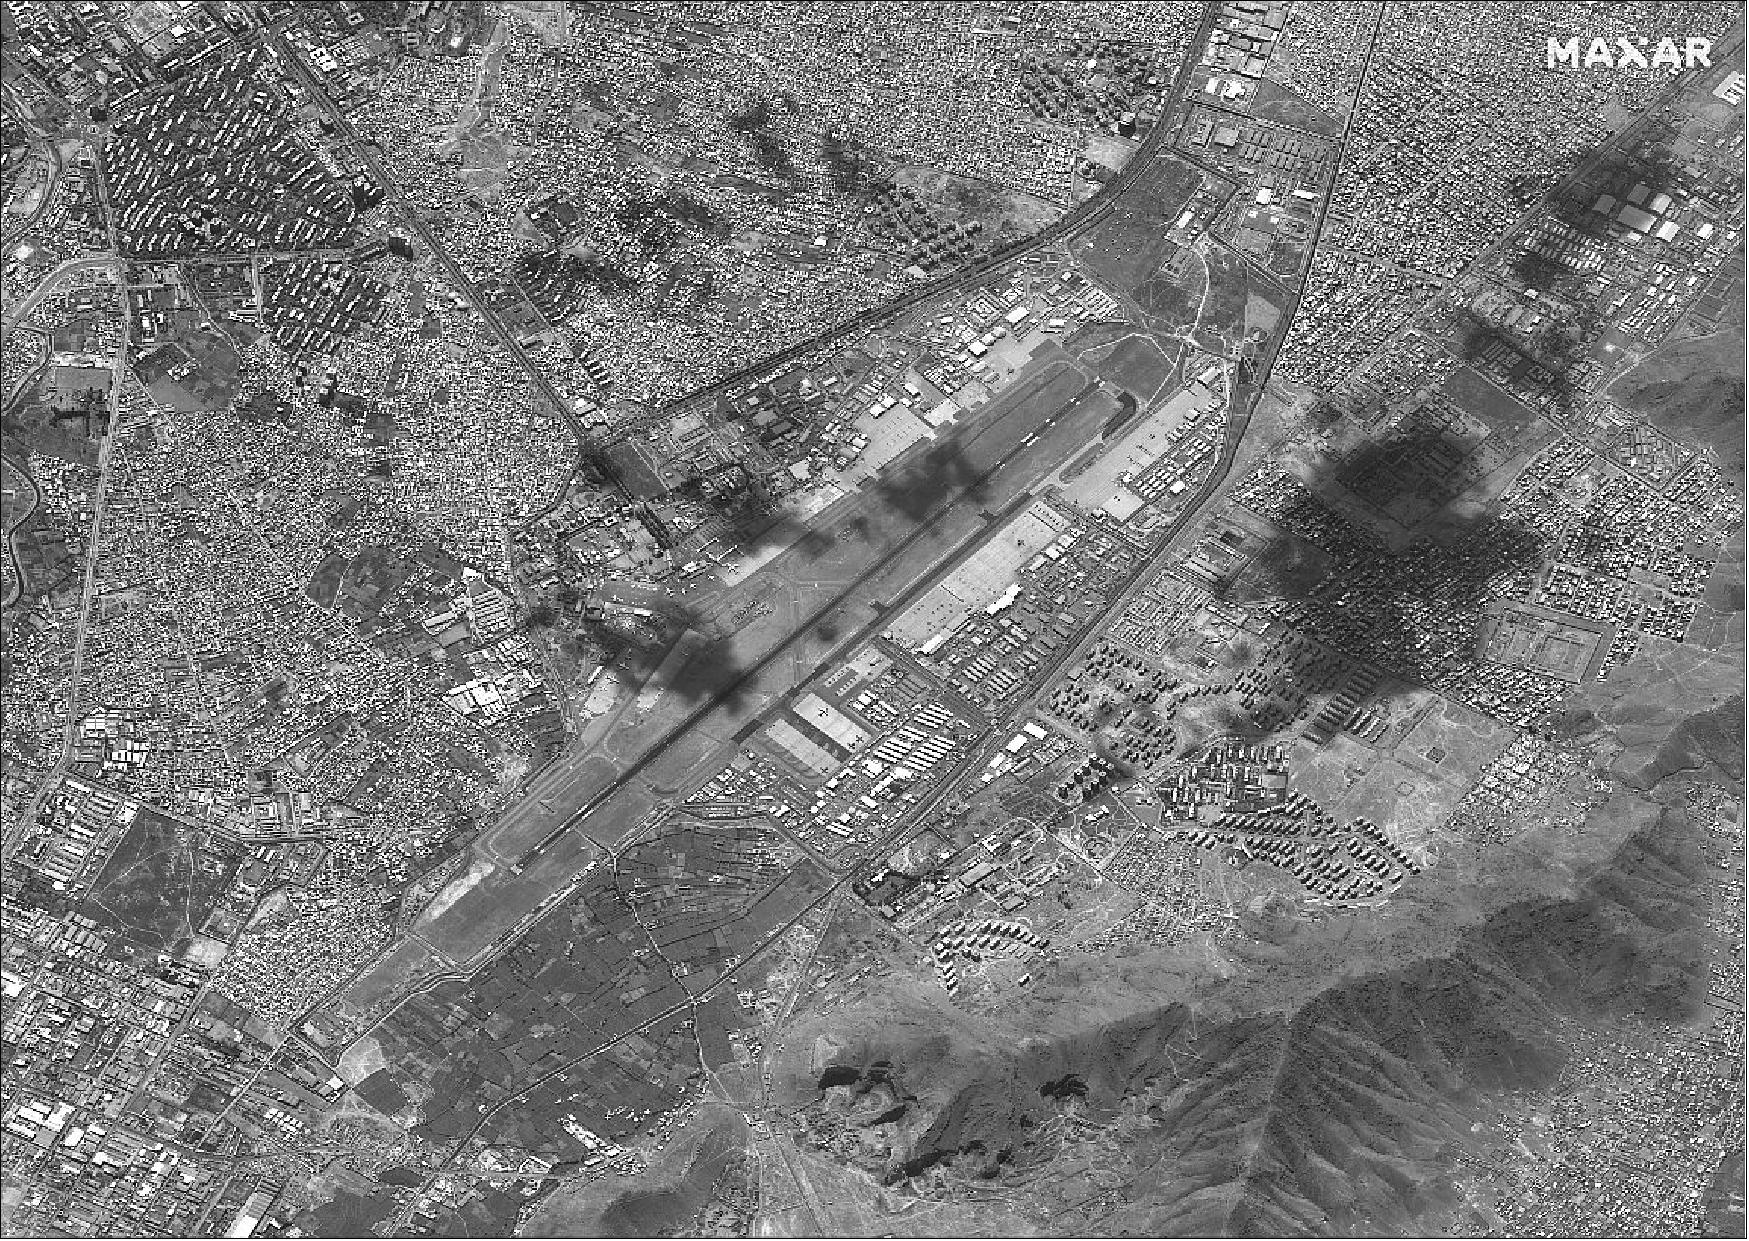 Figure 4: Overview of Hamid Karzai International Airport, Afghanistan. Maxar collected new satellite imagery on August 19 of Kabul, including the Hamid Karzai International Airport (image credit: Maxar Technologies)